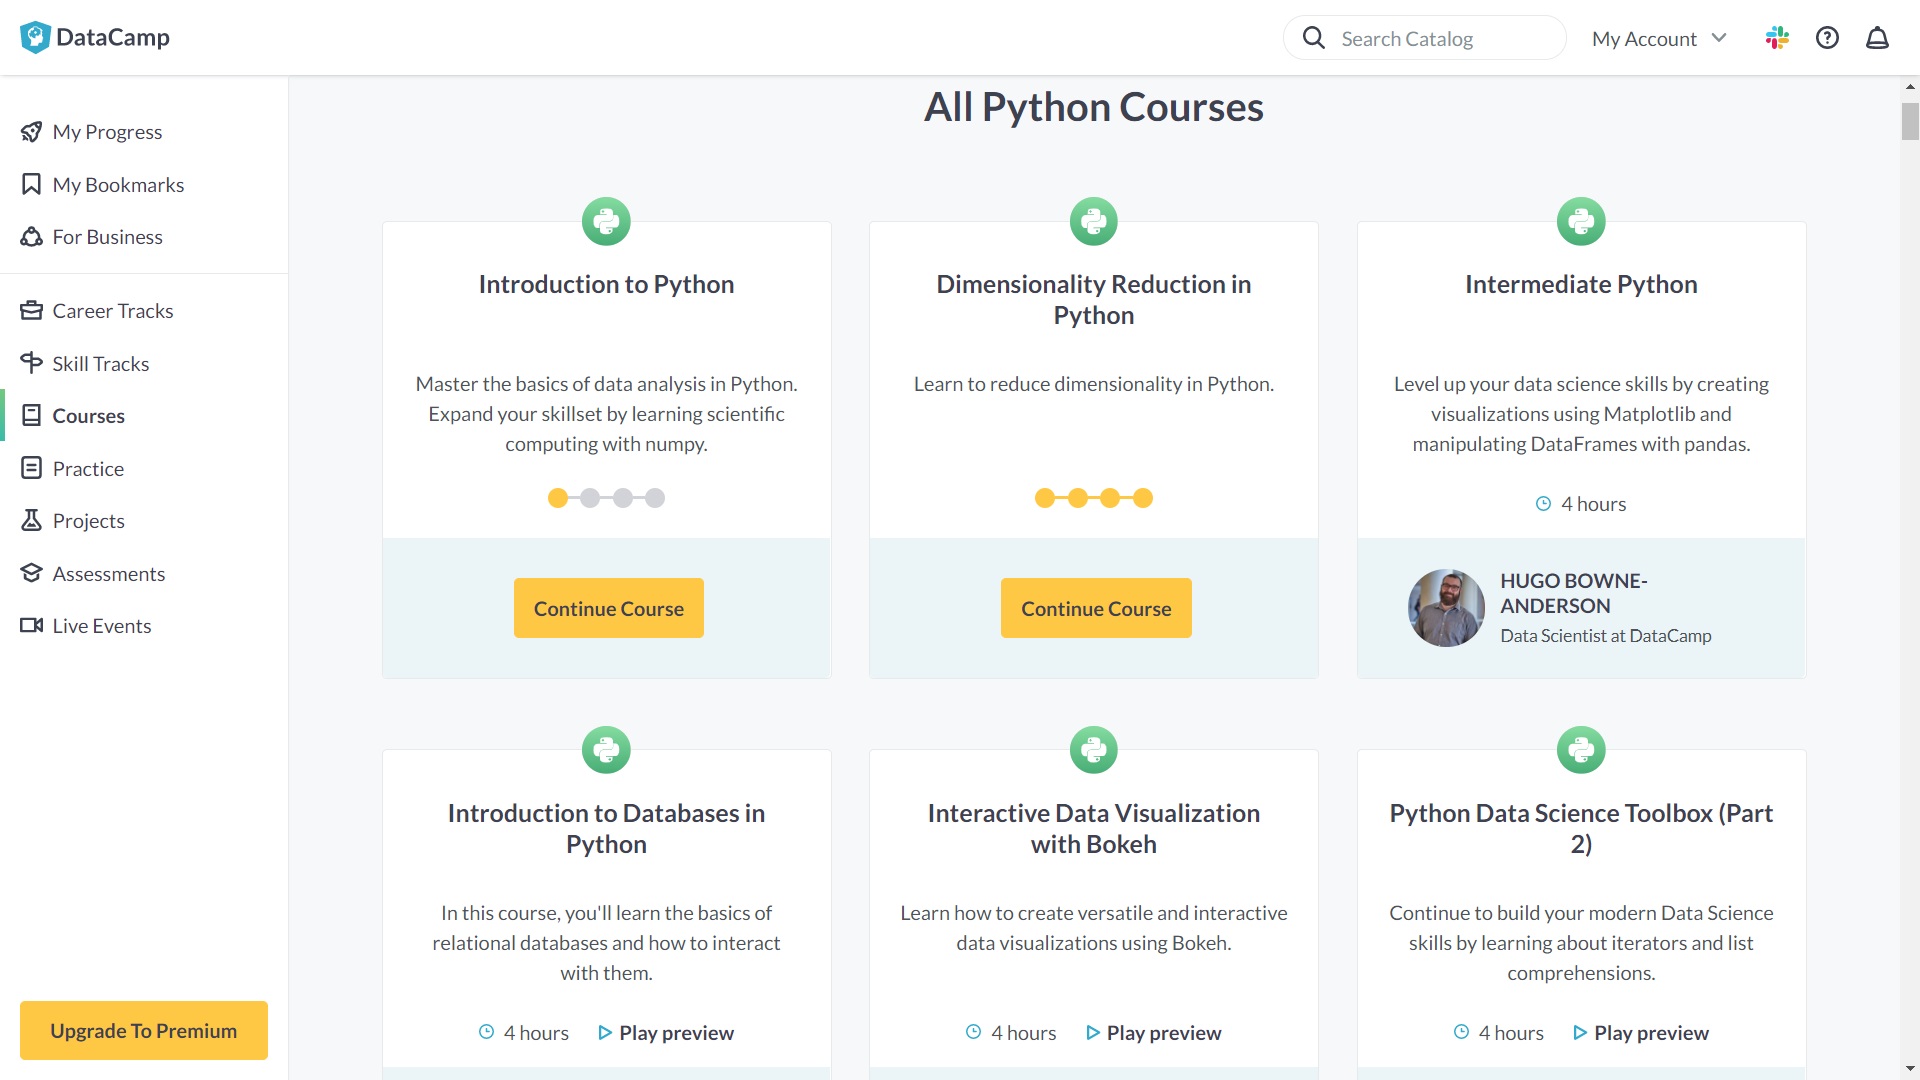 Data science course catalogue in DataCamp account. A few Python courses shown as an example.